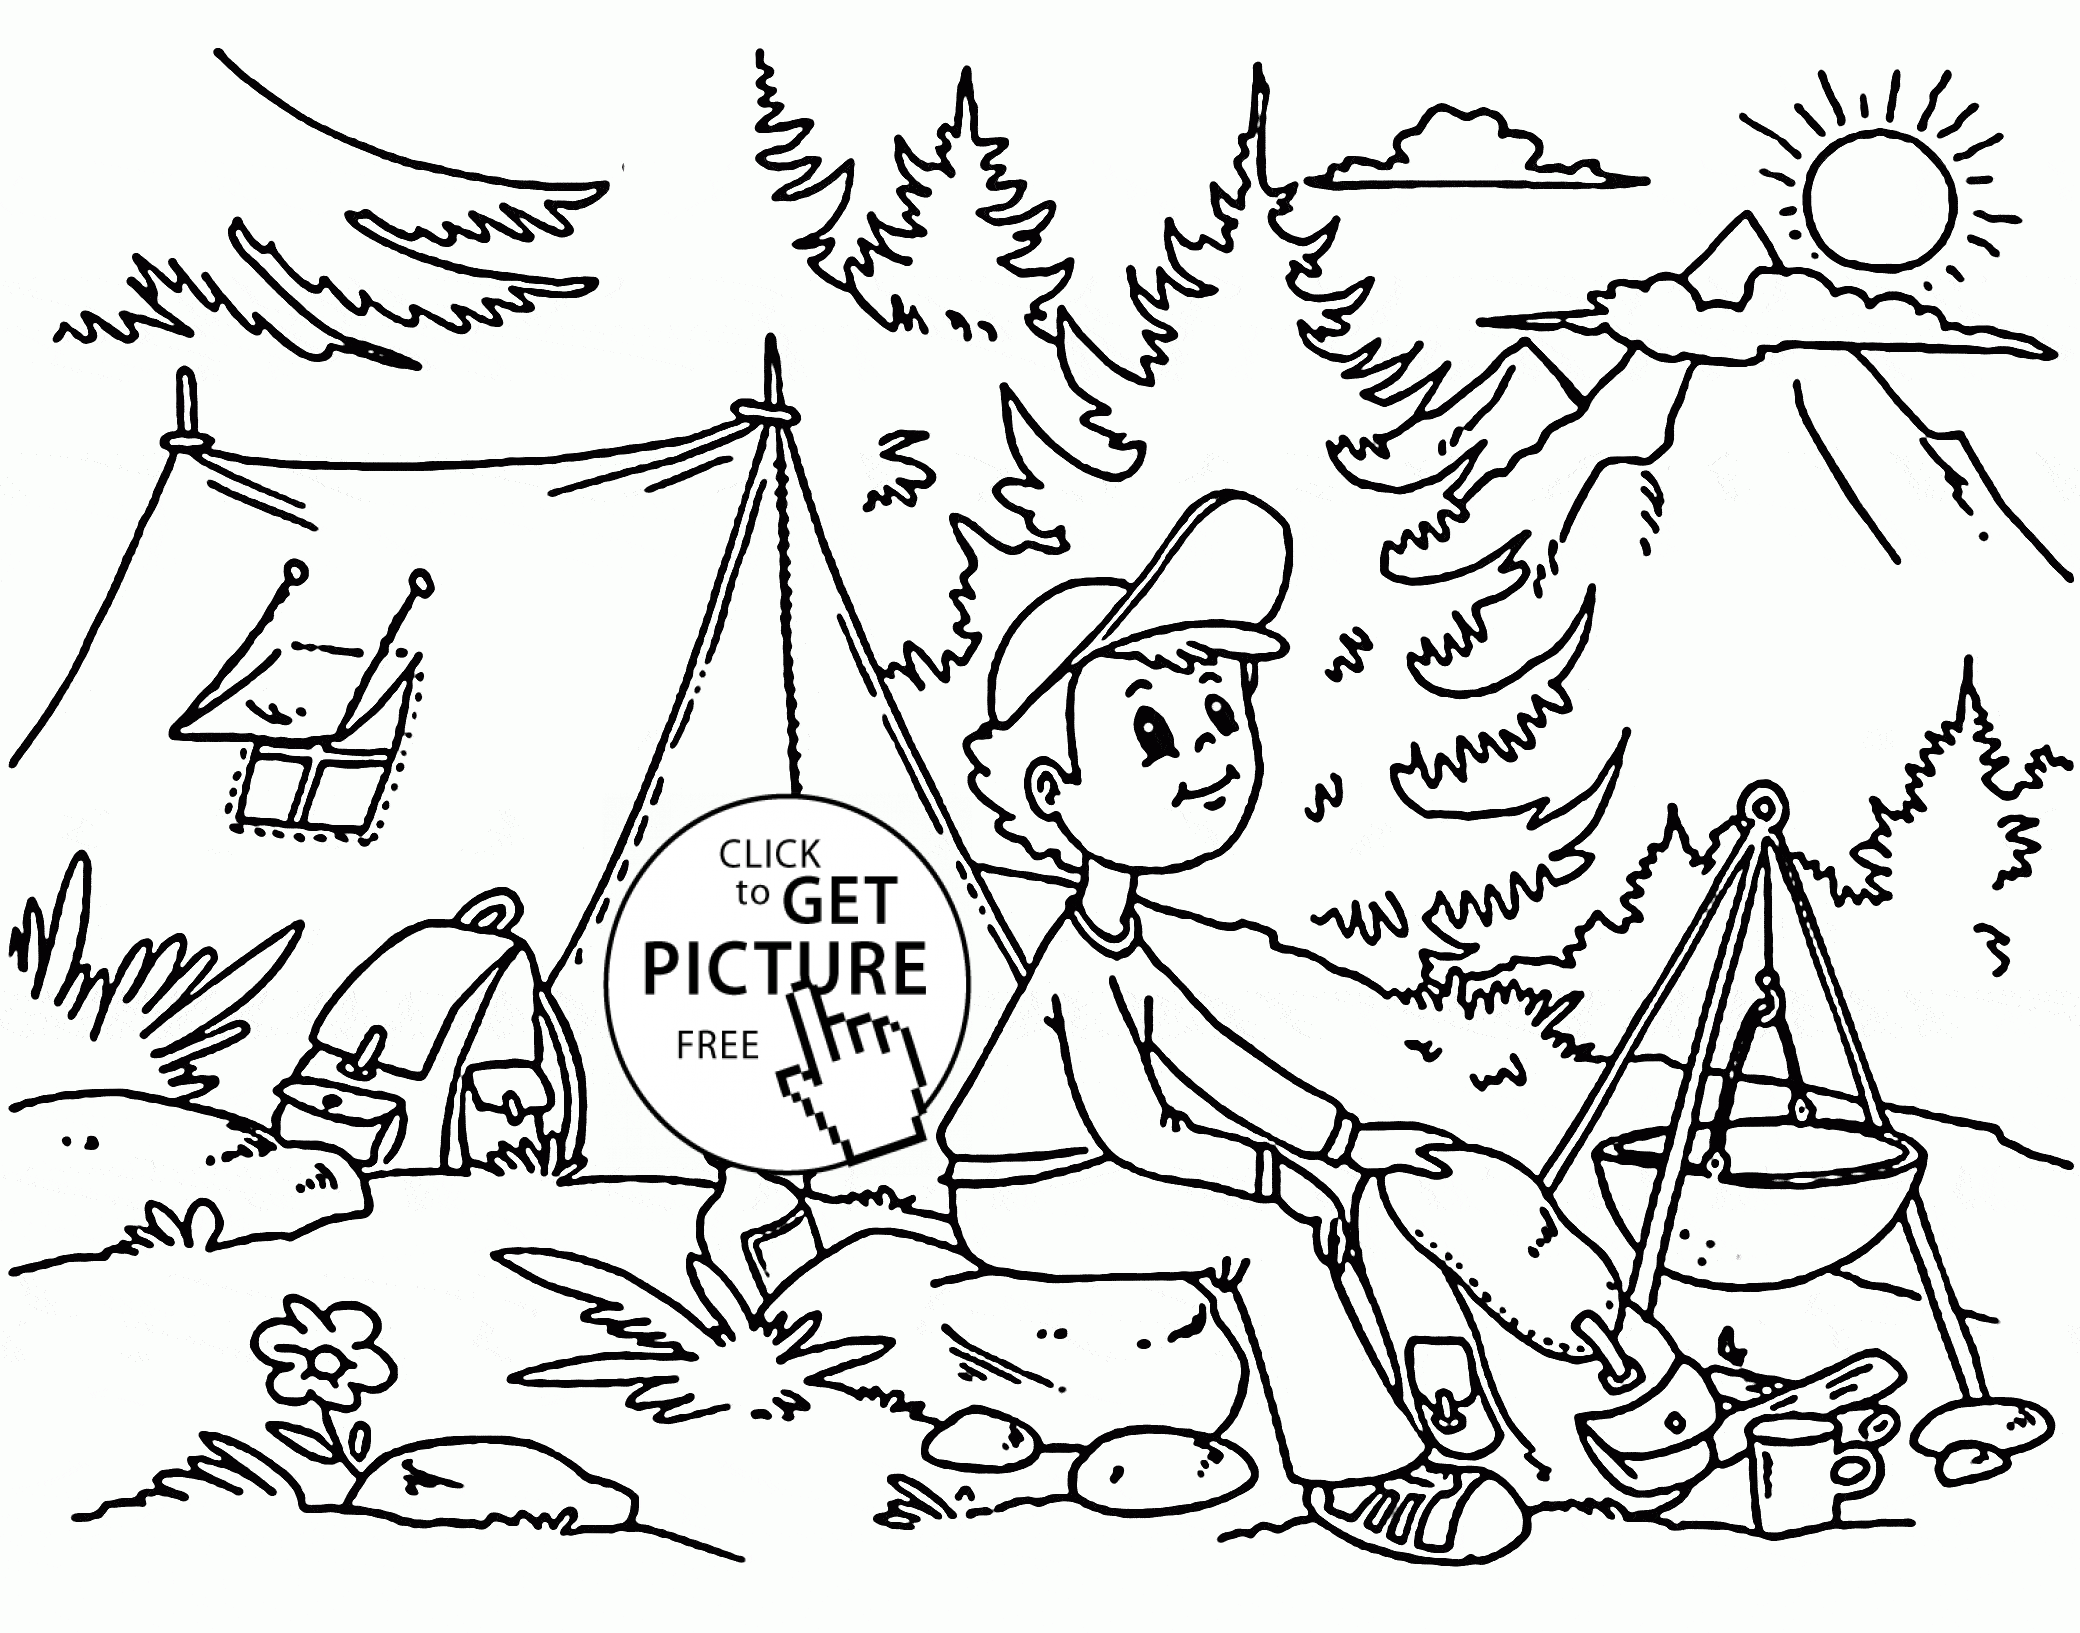 Summer Camp coloring page for kids, seasons coloring pages ...